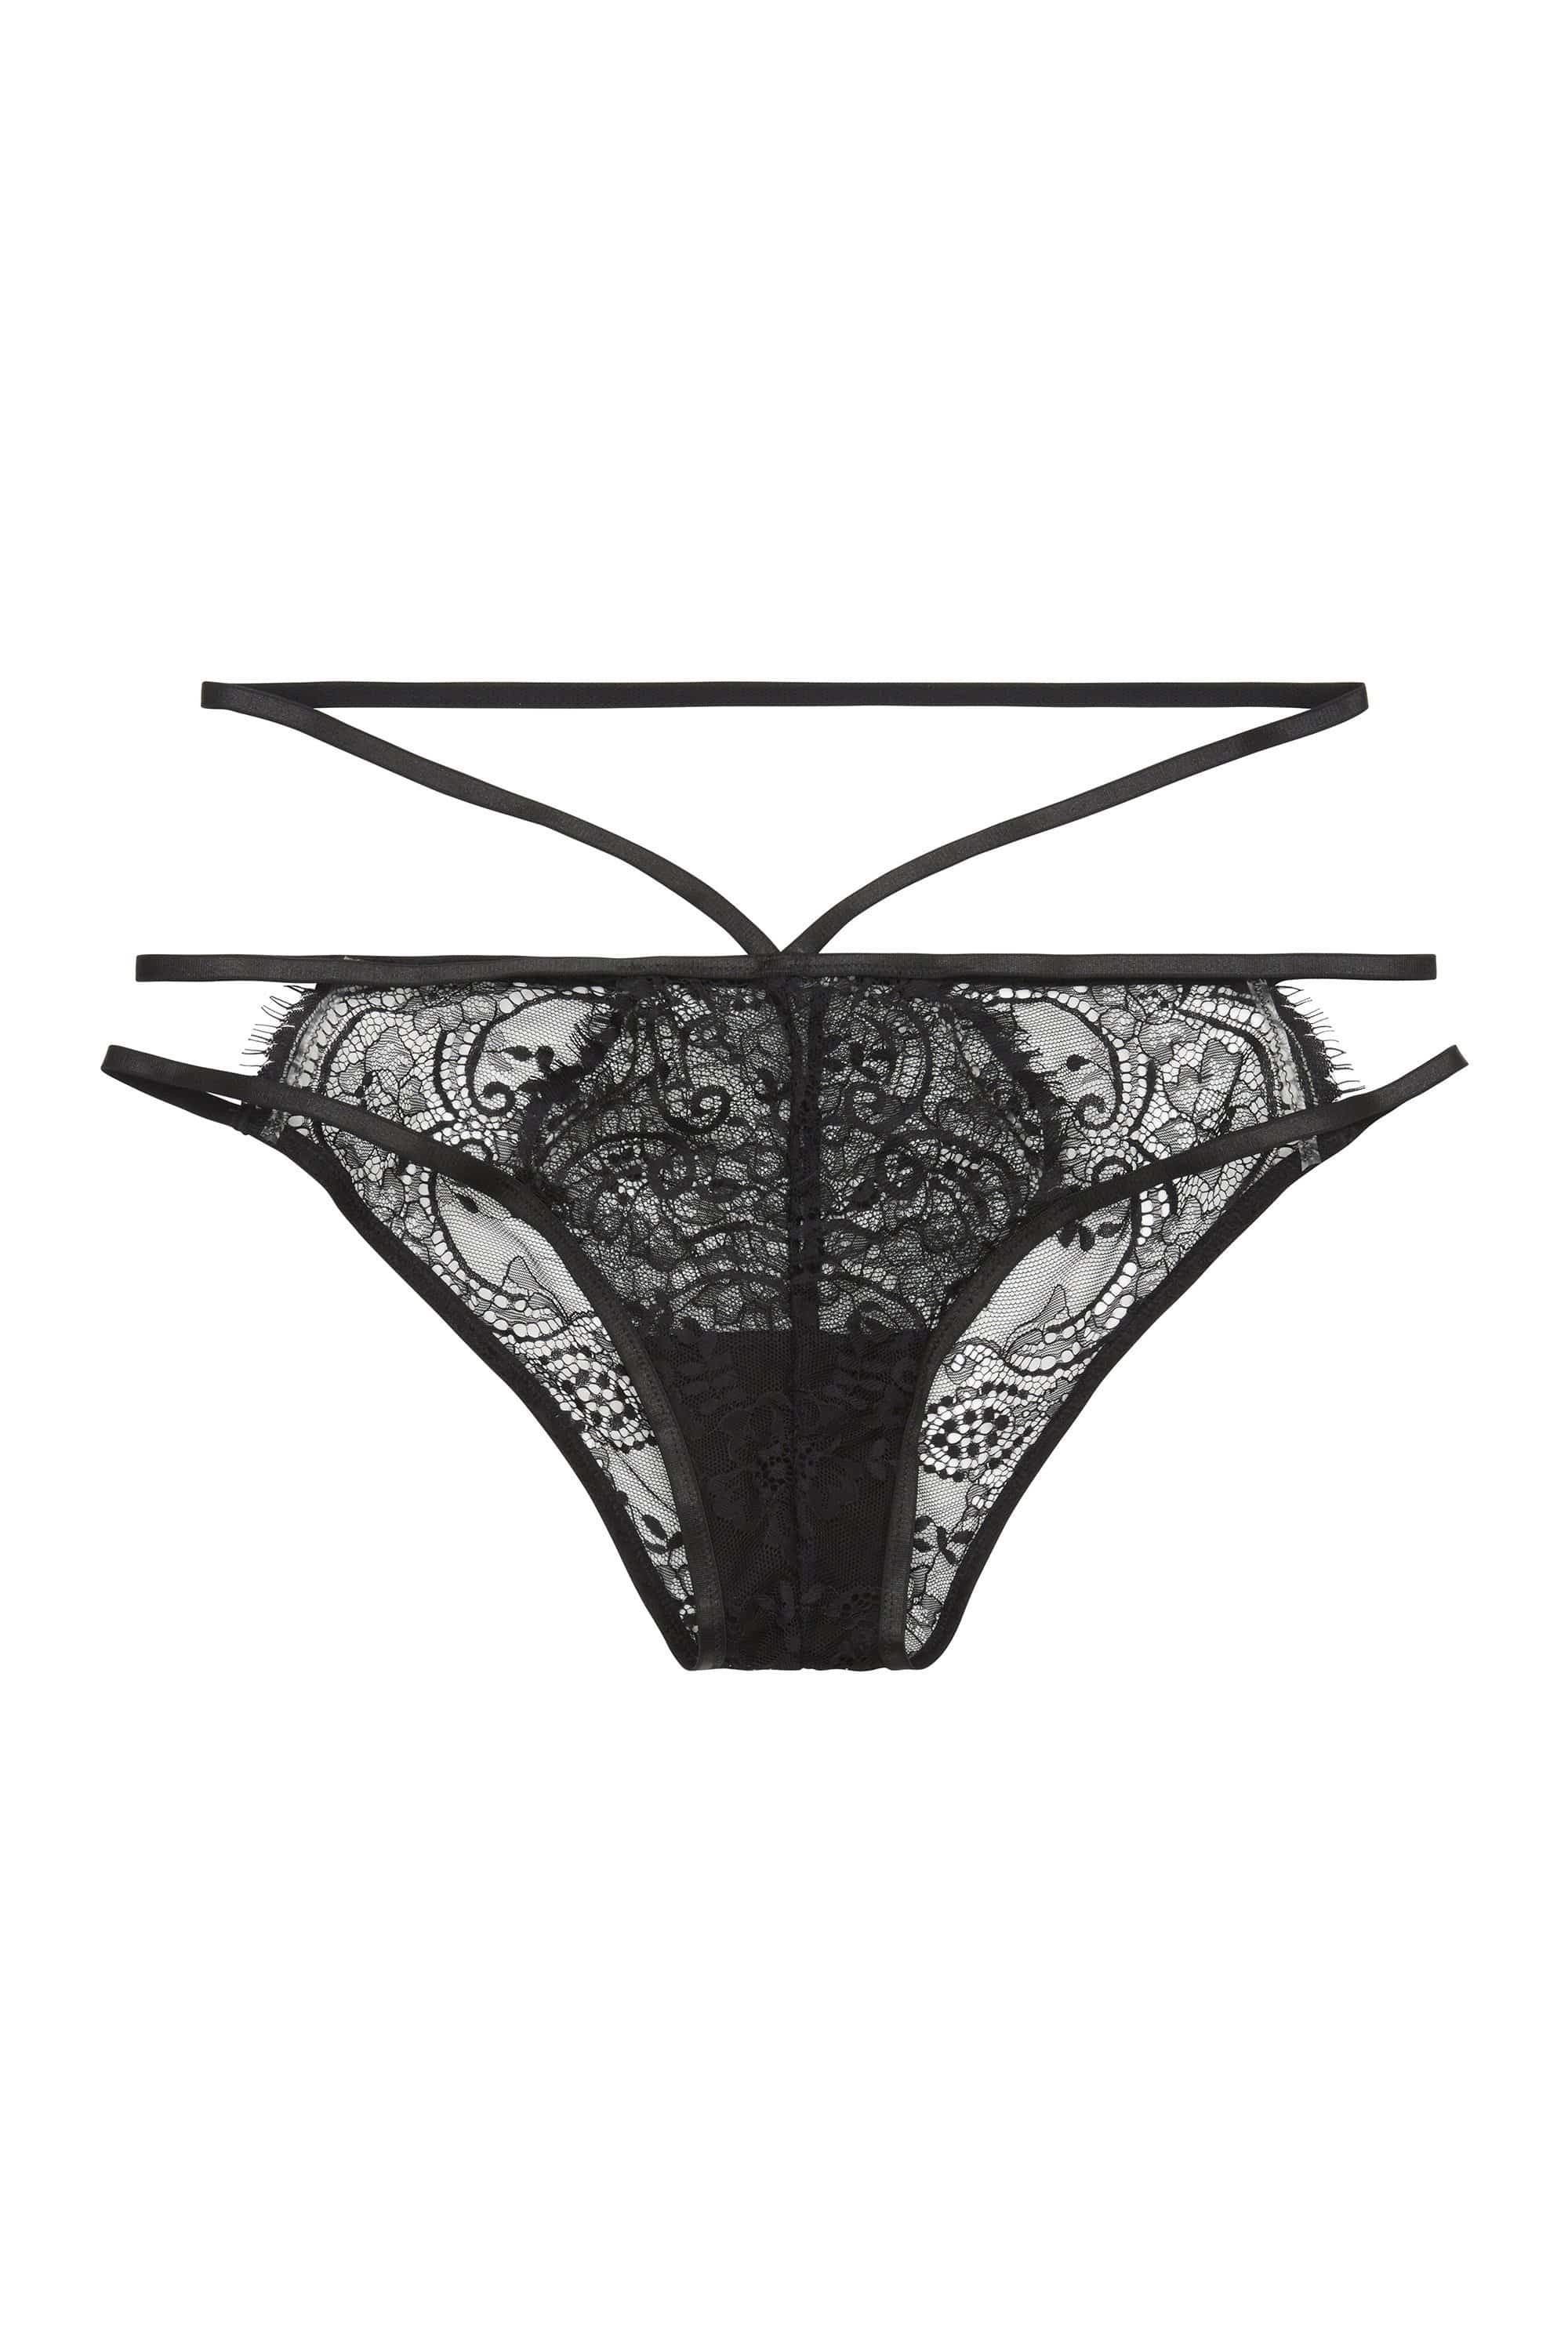 Wolf & Whistle Tanja black lace strappy brief